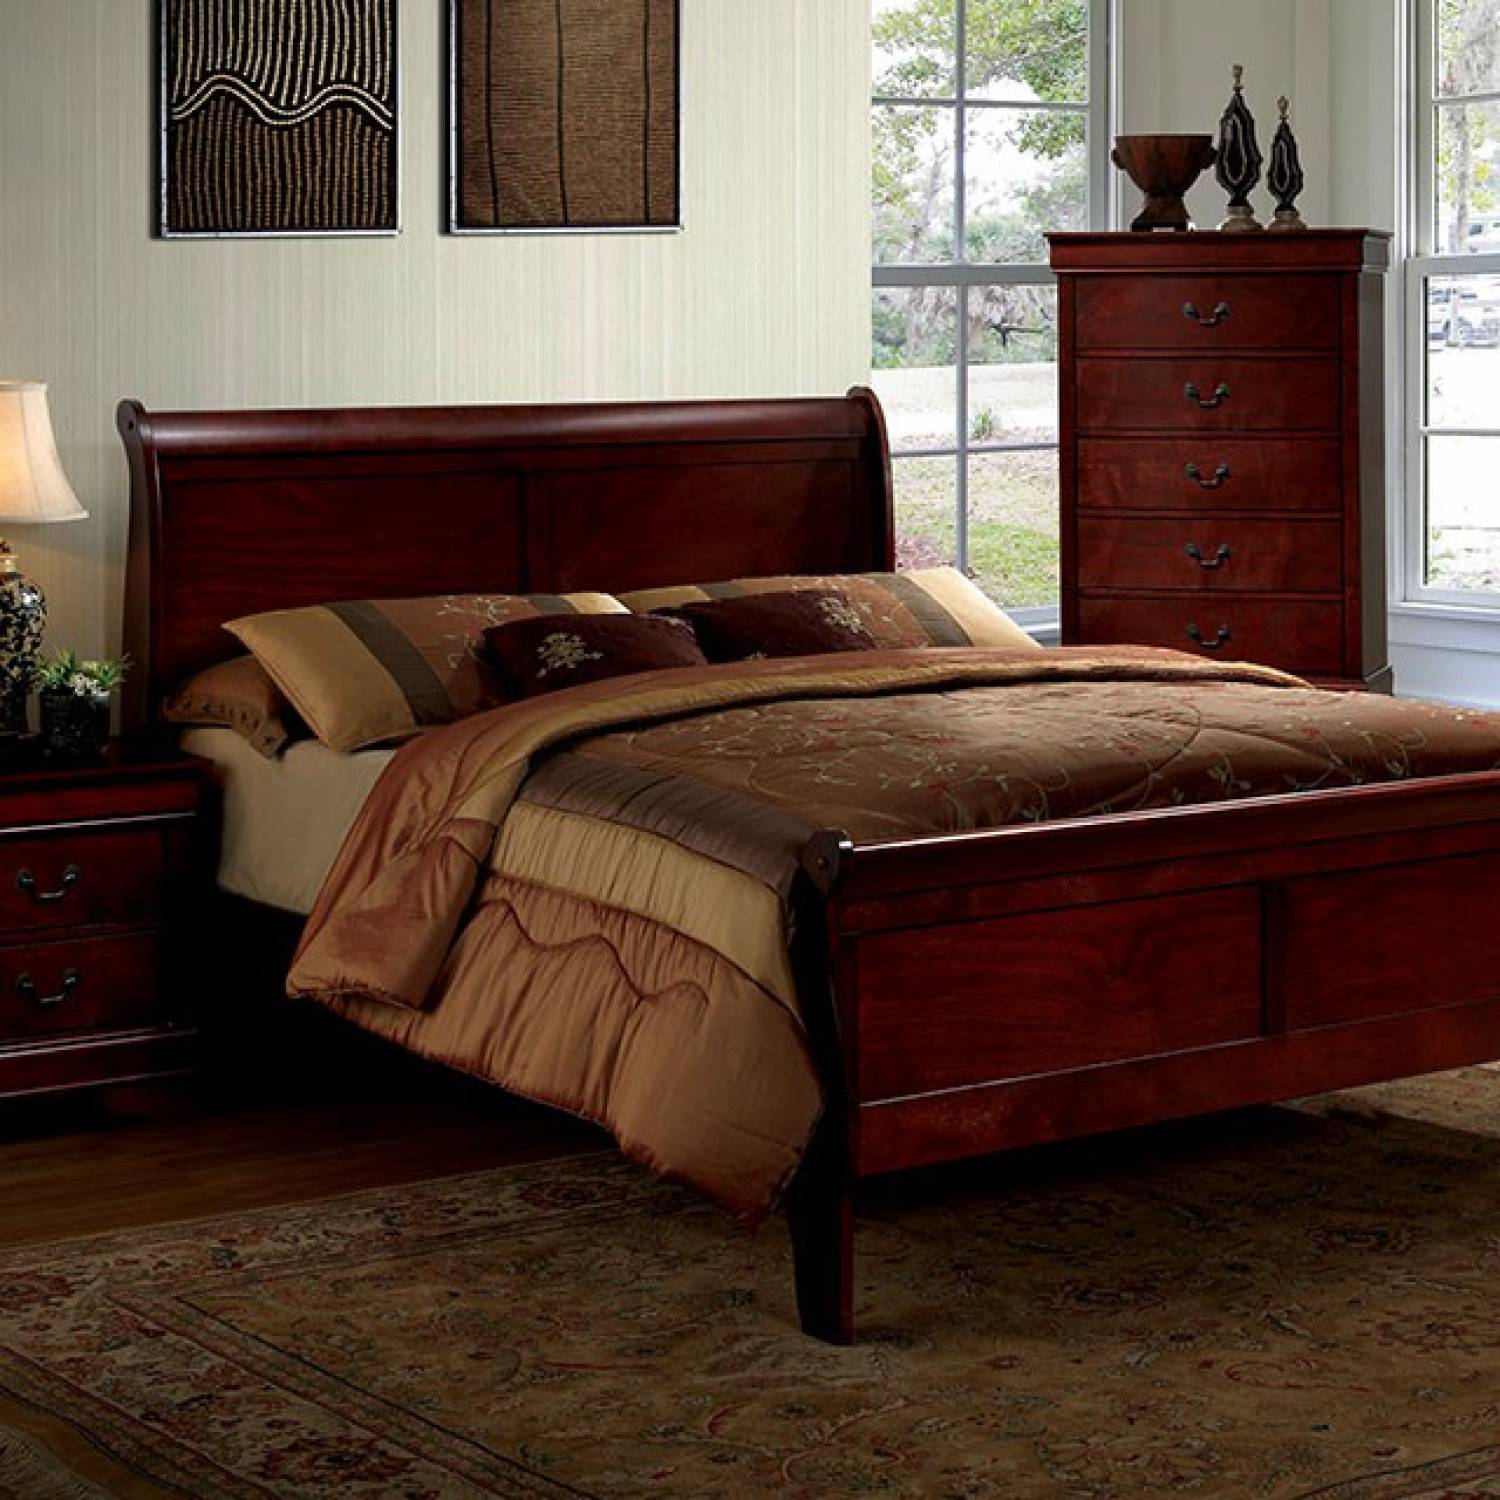 ACME Louis Philippe III Queen Bed with Storage in Cherry, Multiple Colors 